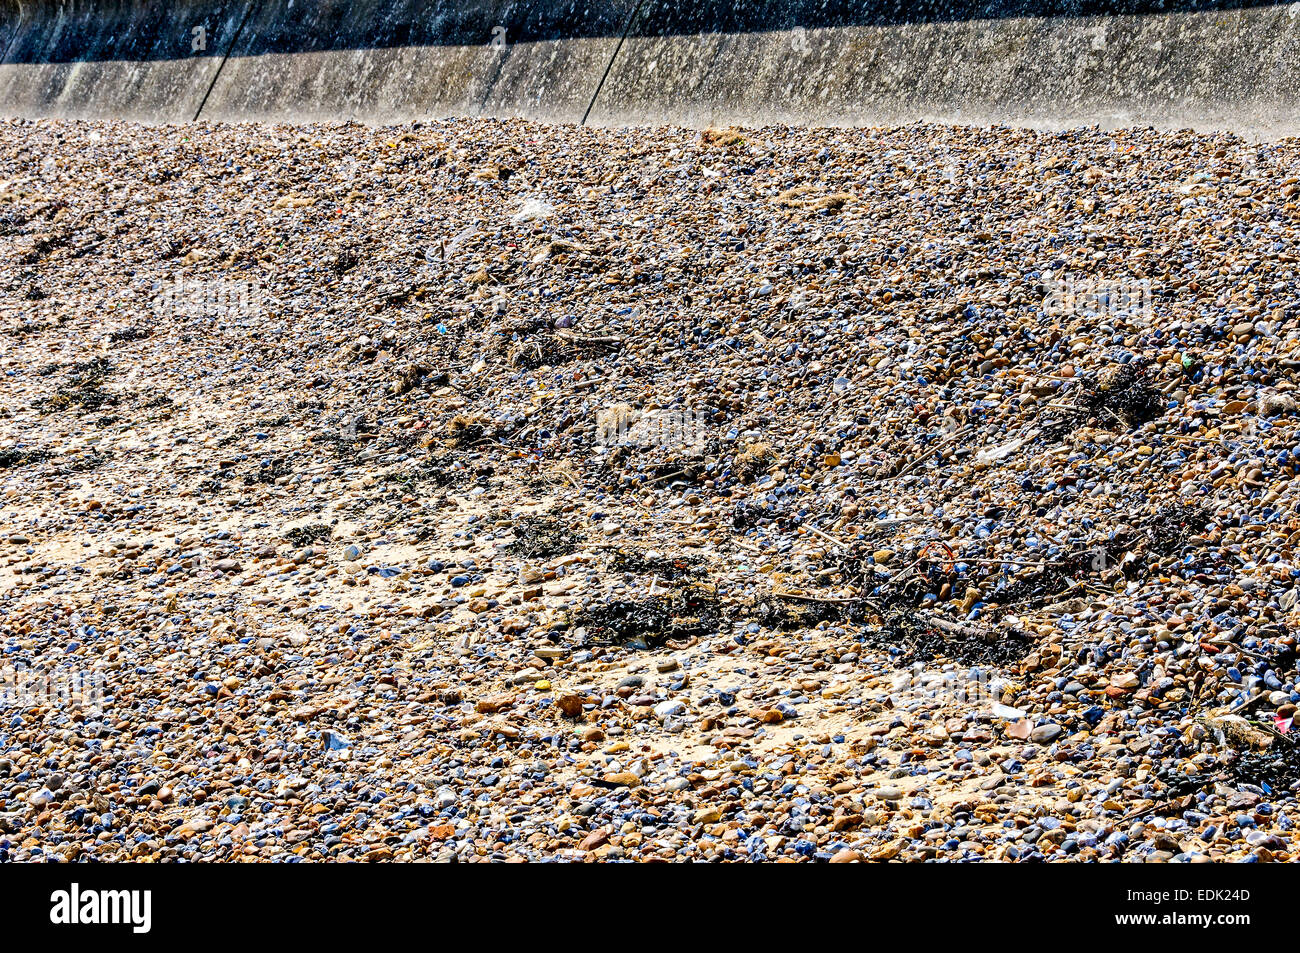 A concrete sea wall contains a banked shingle beach of reddish, blue and other coloured pebbles littered with dry seaweed Stock Photo